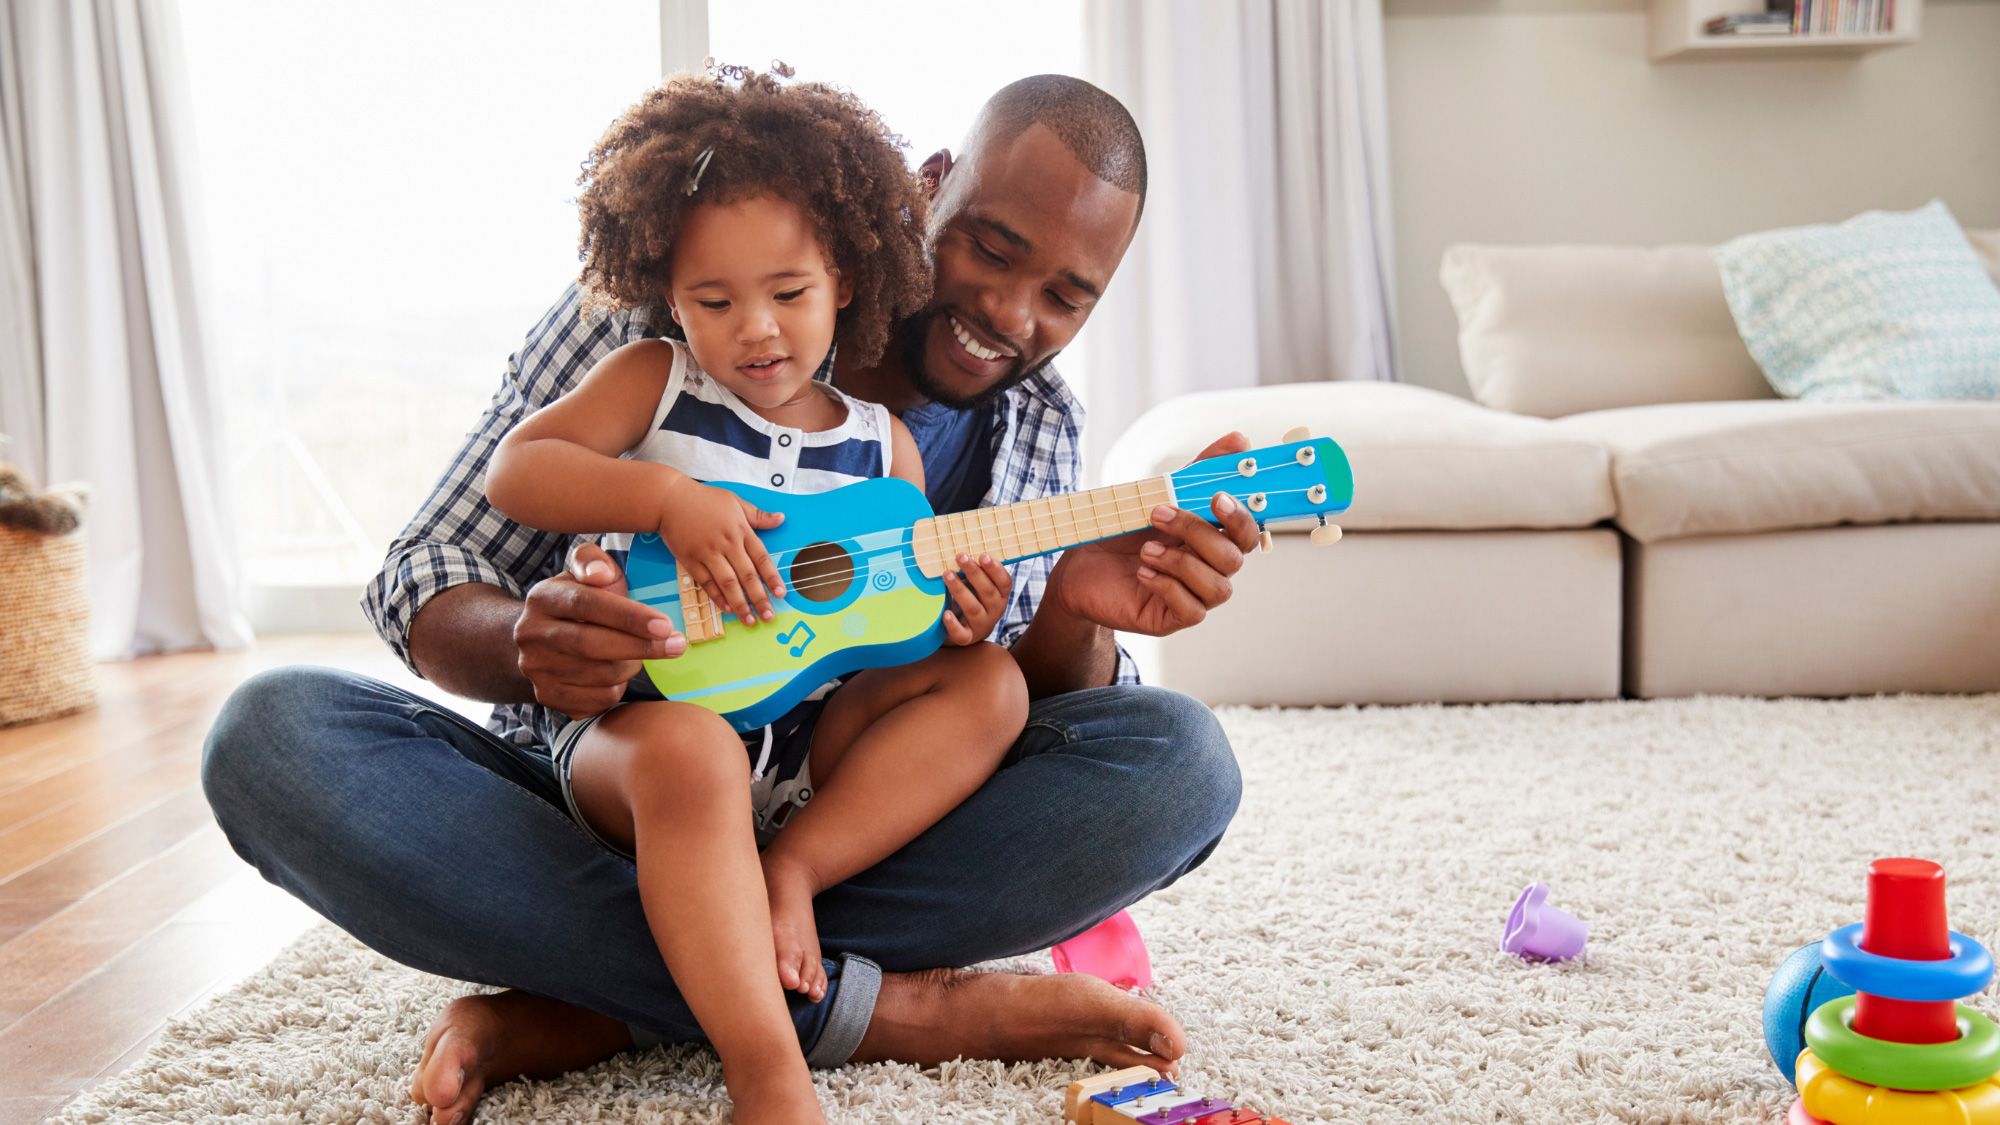 A father playing a ukelele with his child